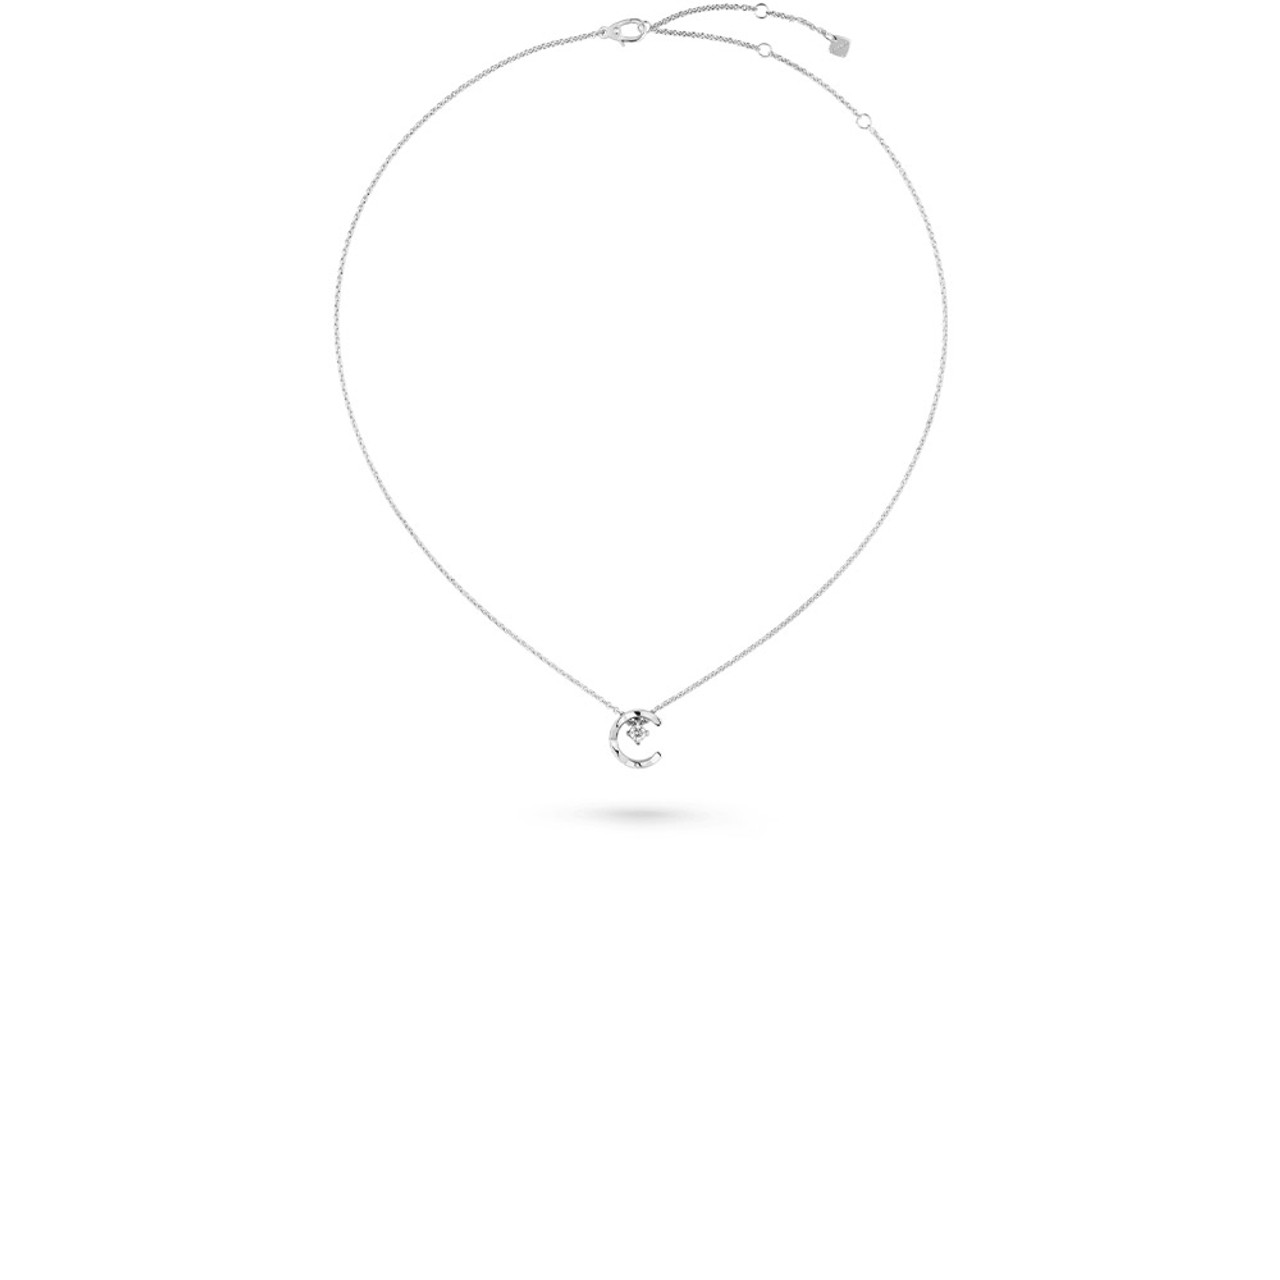 CHANEL COCO NECKLACE-39080 - Hyde Park Jewelers